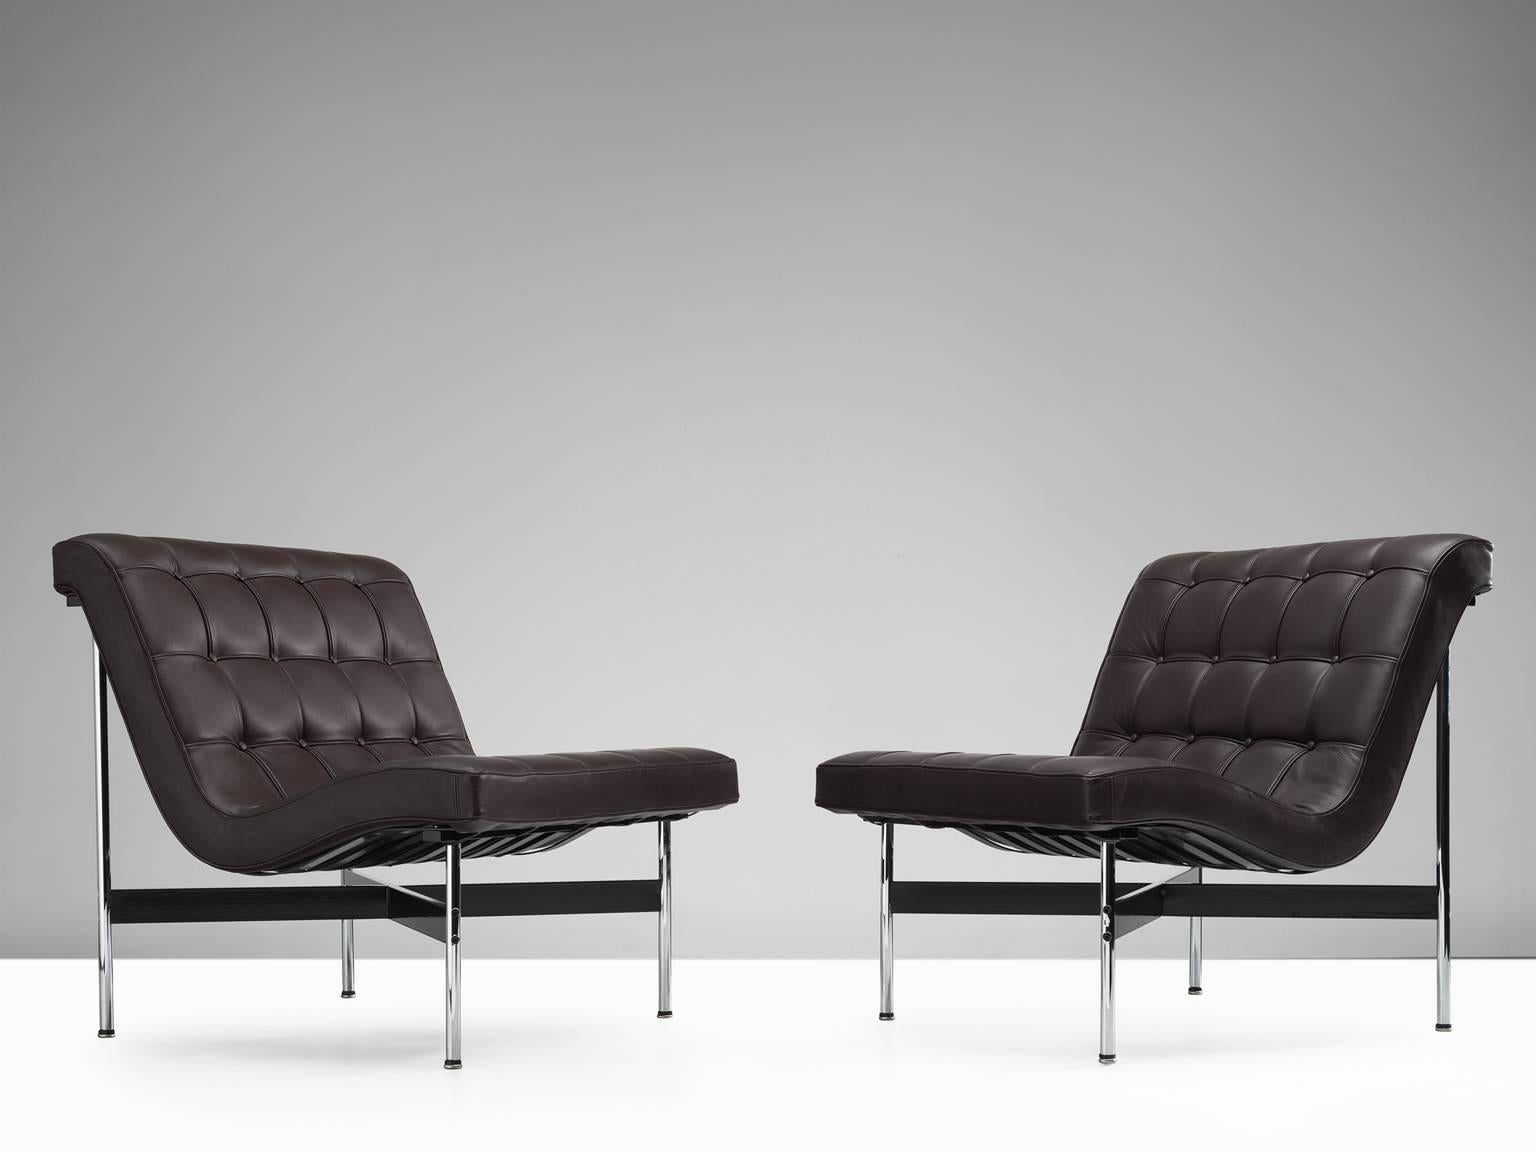 Set of lounge chairs, faux leather, steel, 1950s design, 1980s production, United States.

A pair of lounge chairs designed by William Katavolos, Ross Littell and Douglas Kelley for Laverne International from the Architectural Group One line. The